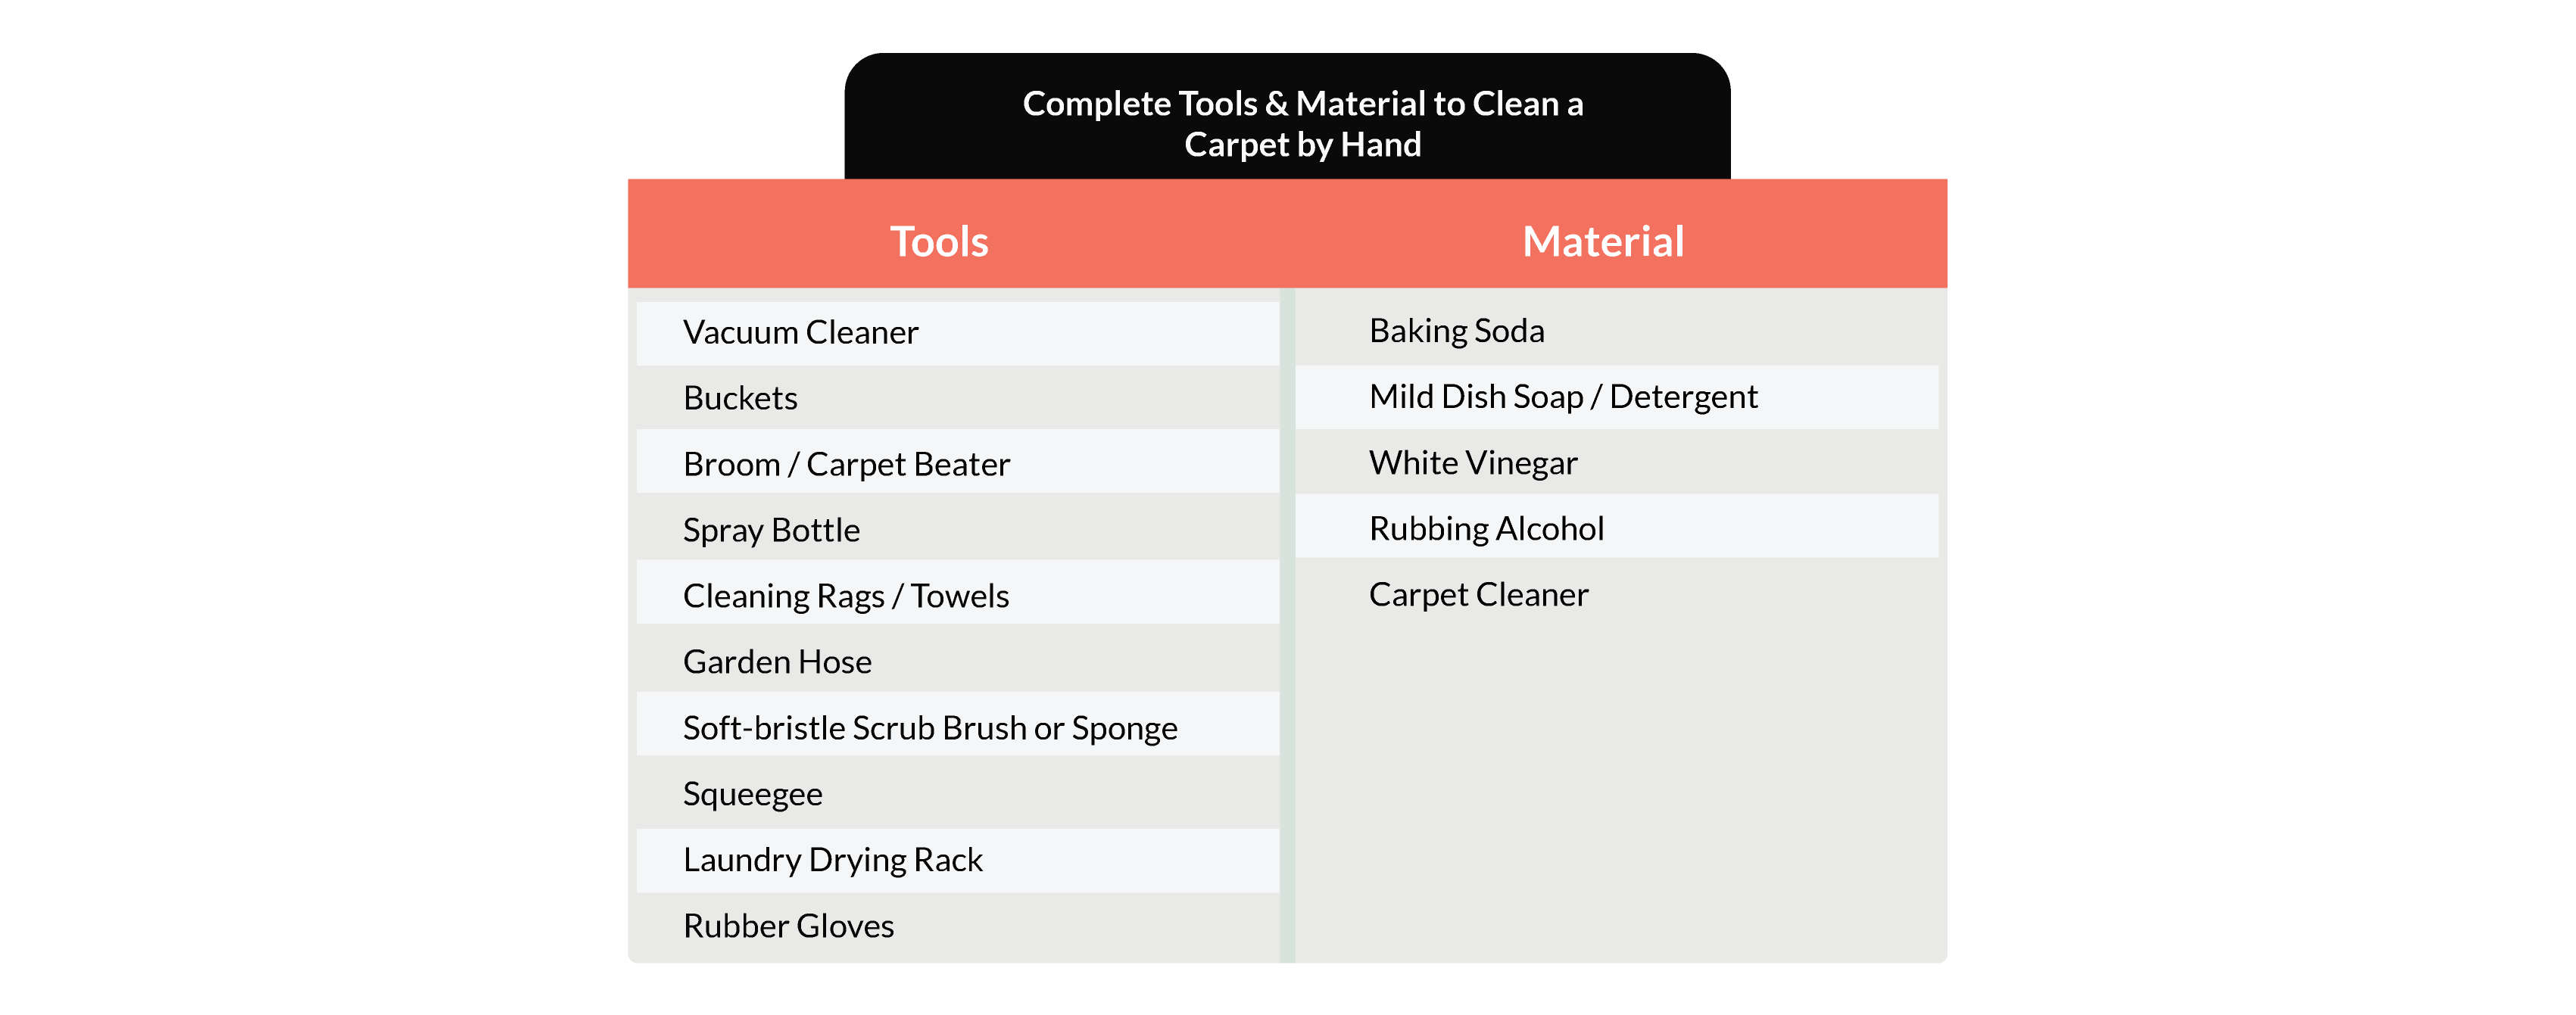 carpet-cleaning-tools-and-materials-required